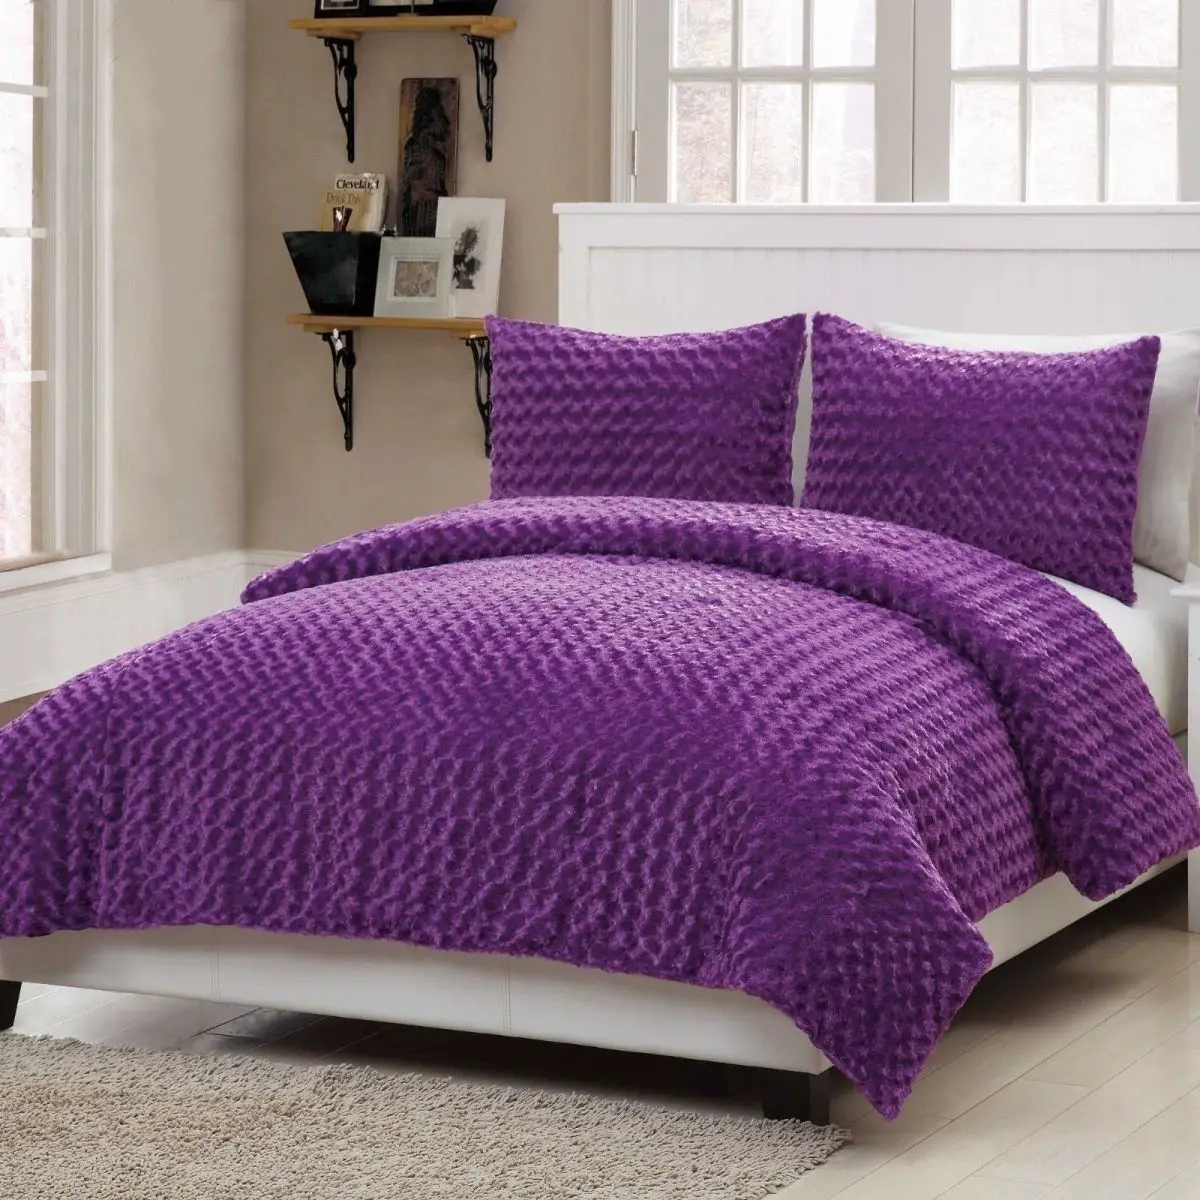 NEW Twin Full Bed 3 pc Solid Purple Bright Faux Fur Soft Comforter ...